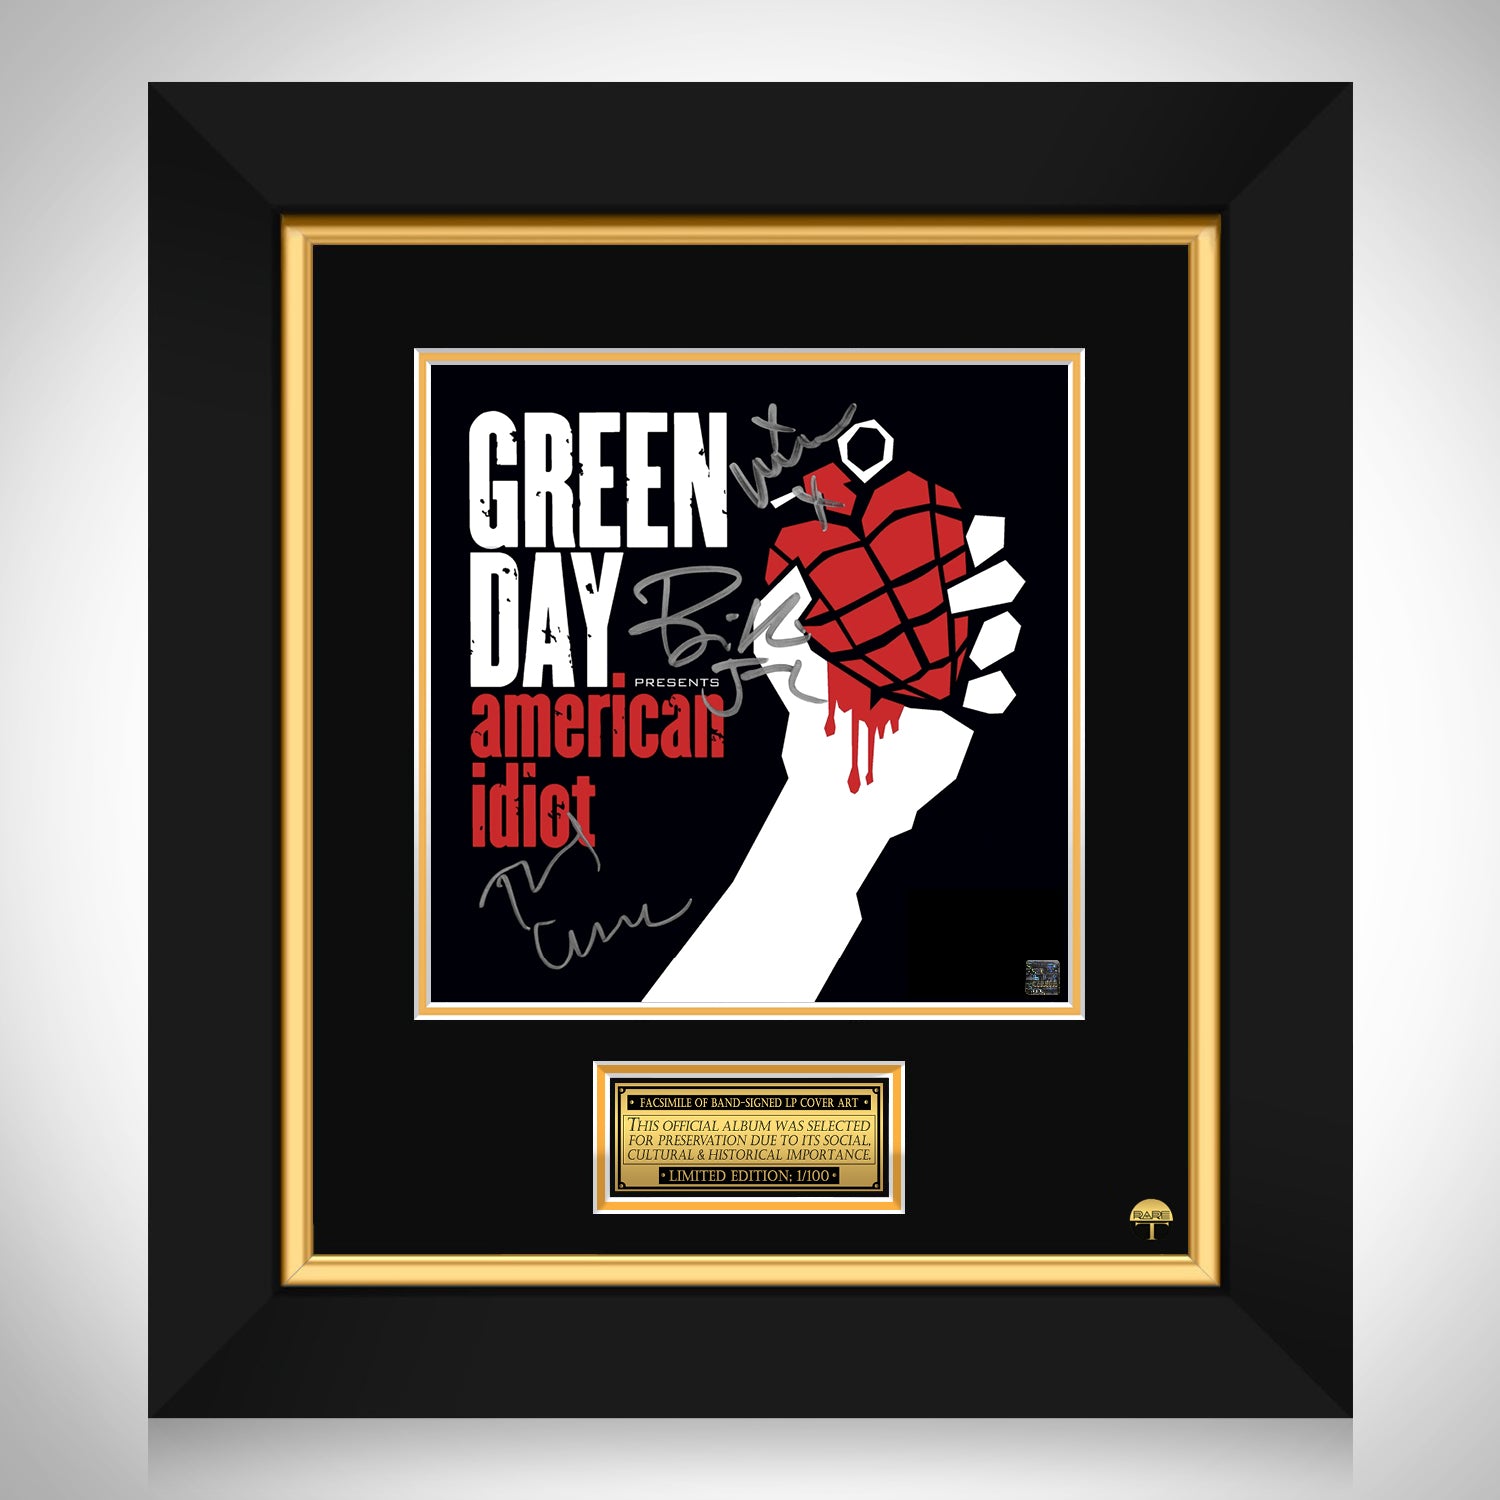 Green Day - American Idiot Framed Signature Gold LP Record Display